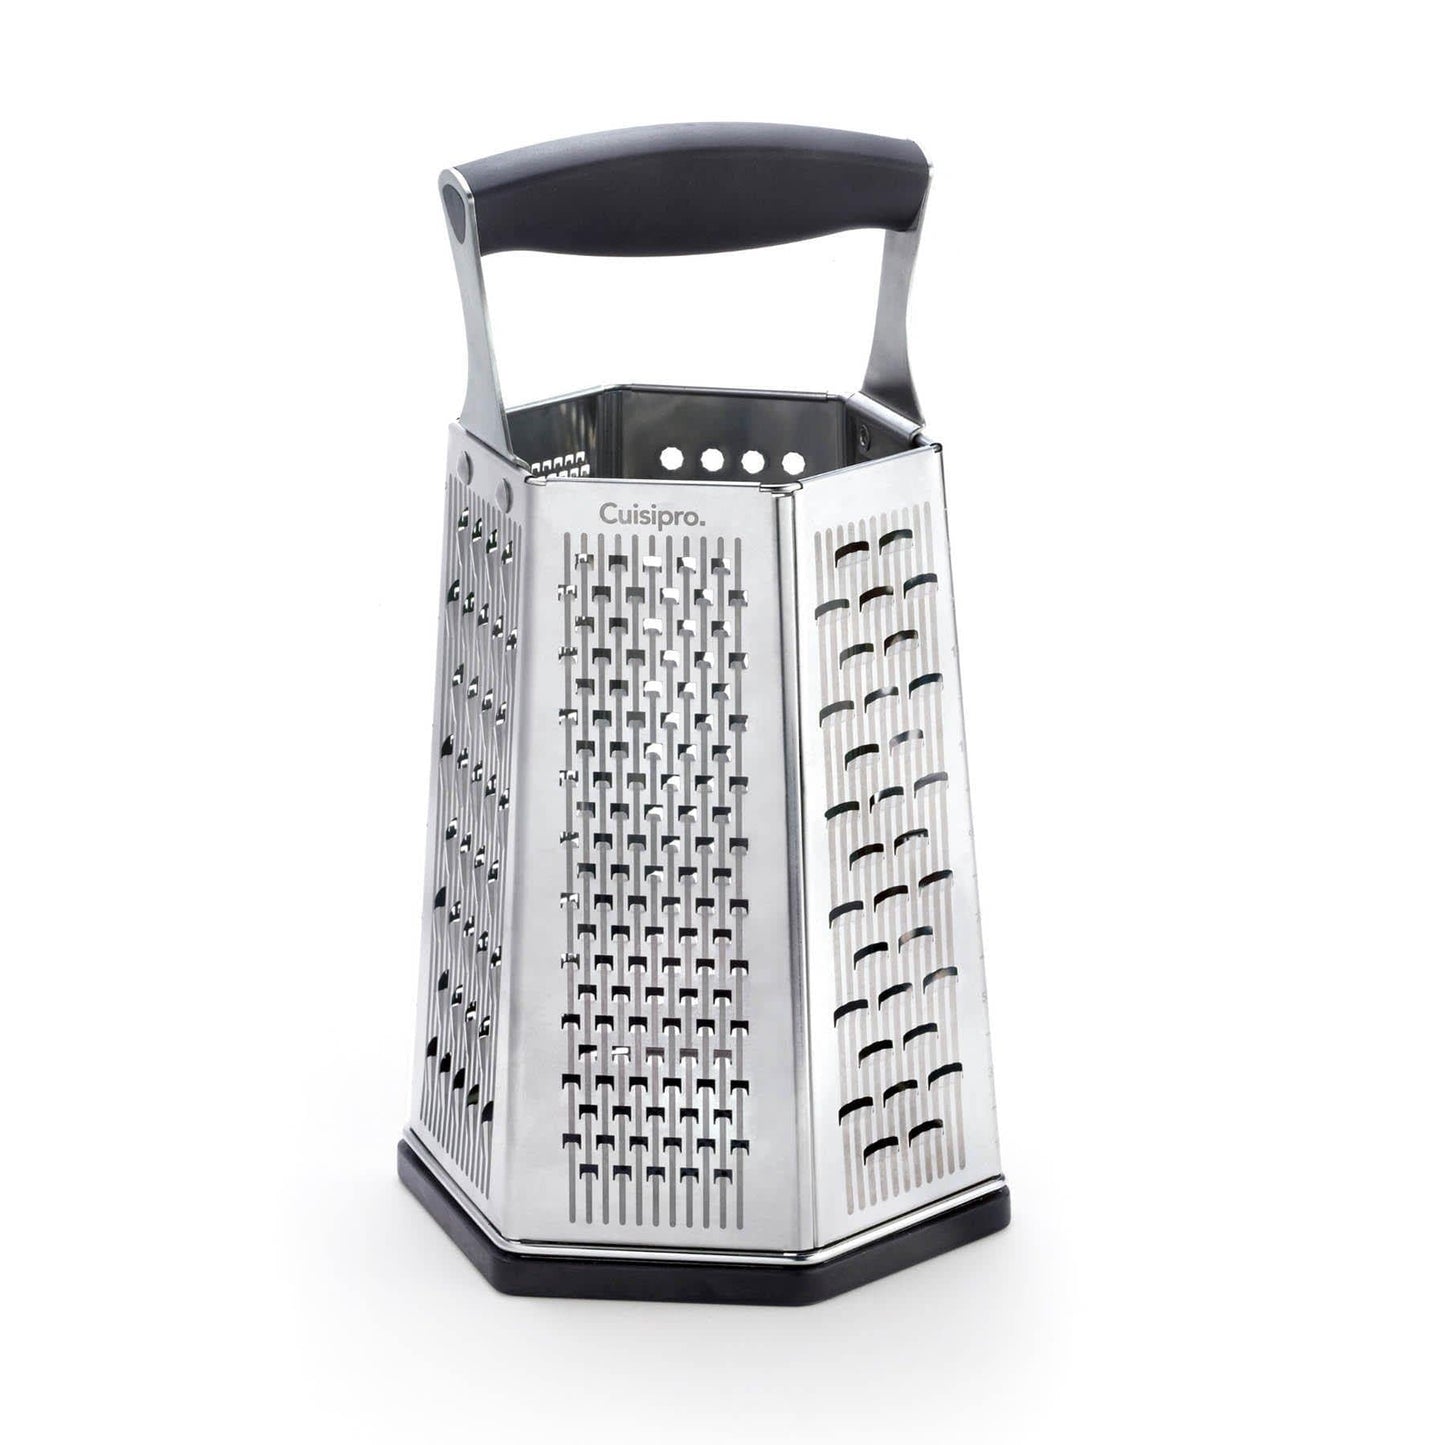 Cuisipro 6 Sided Box Grater - Kitchenalia Westboro